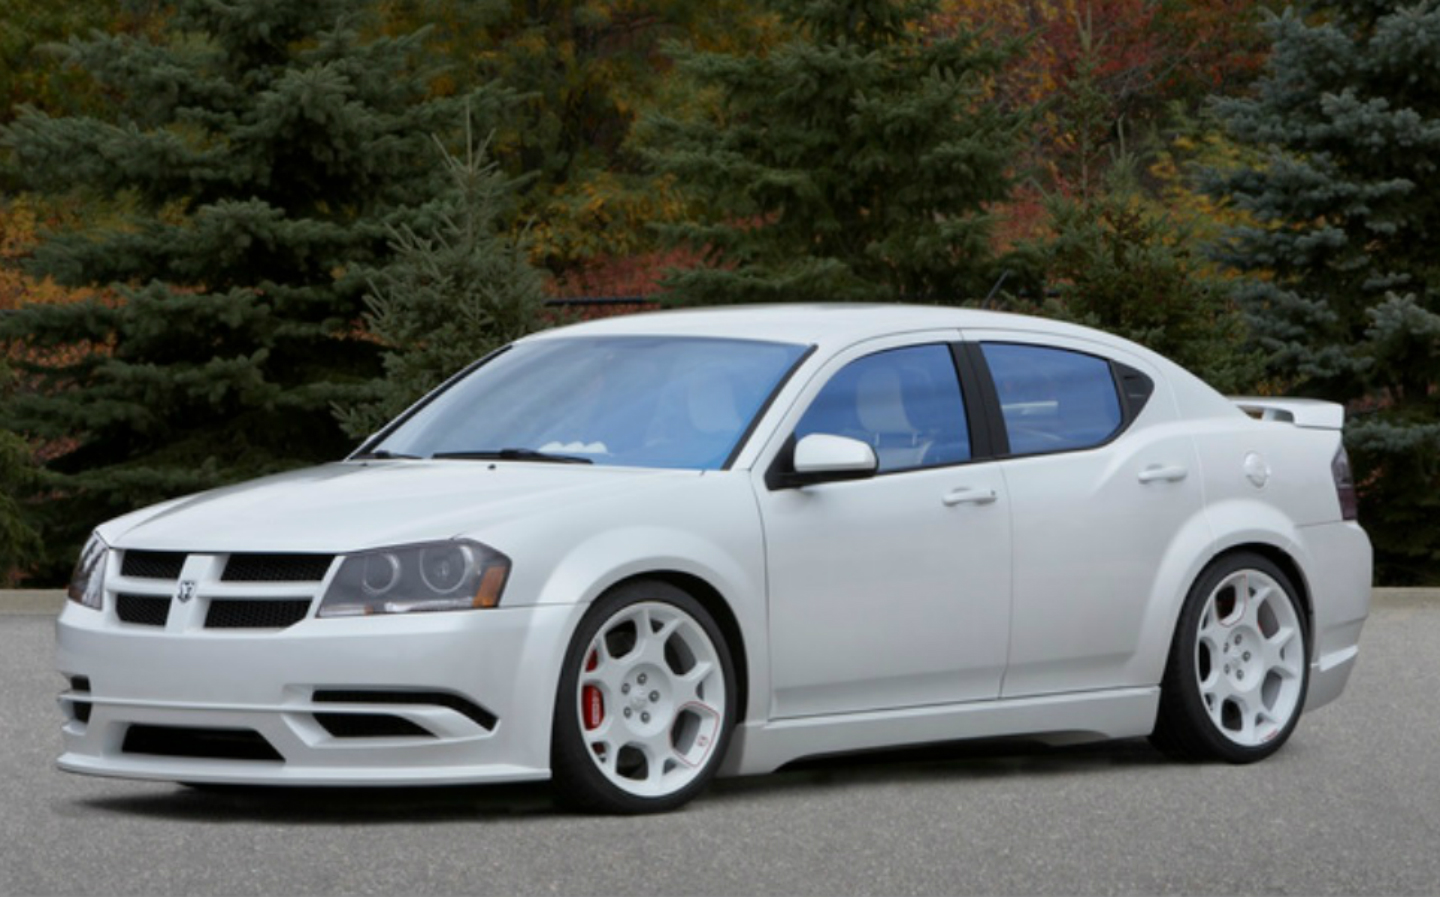 Top 5 Star Wars-inspired special edition cars Dodge Avenger Stormtrooper